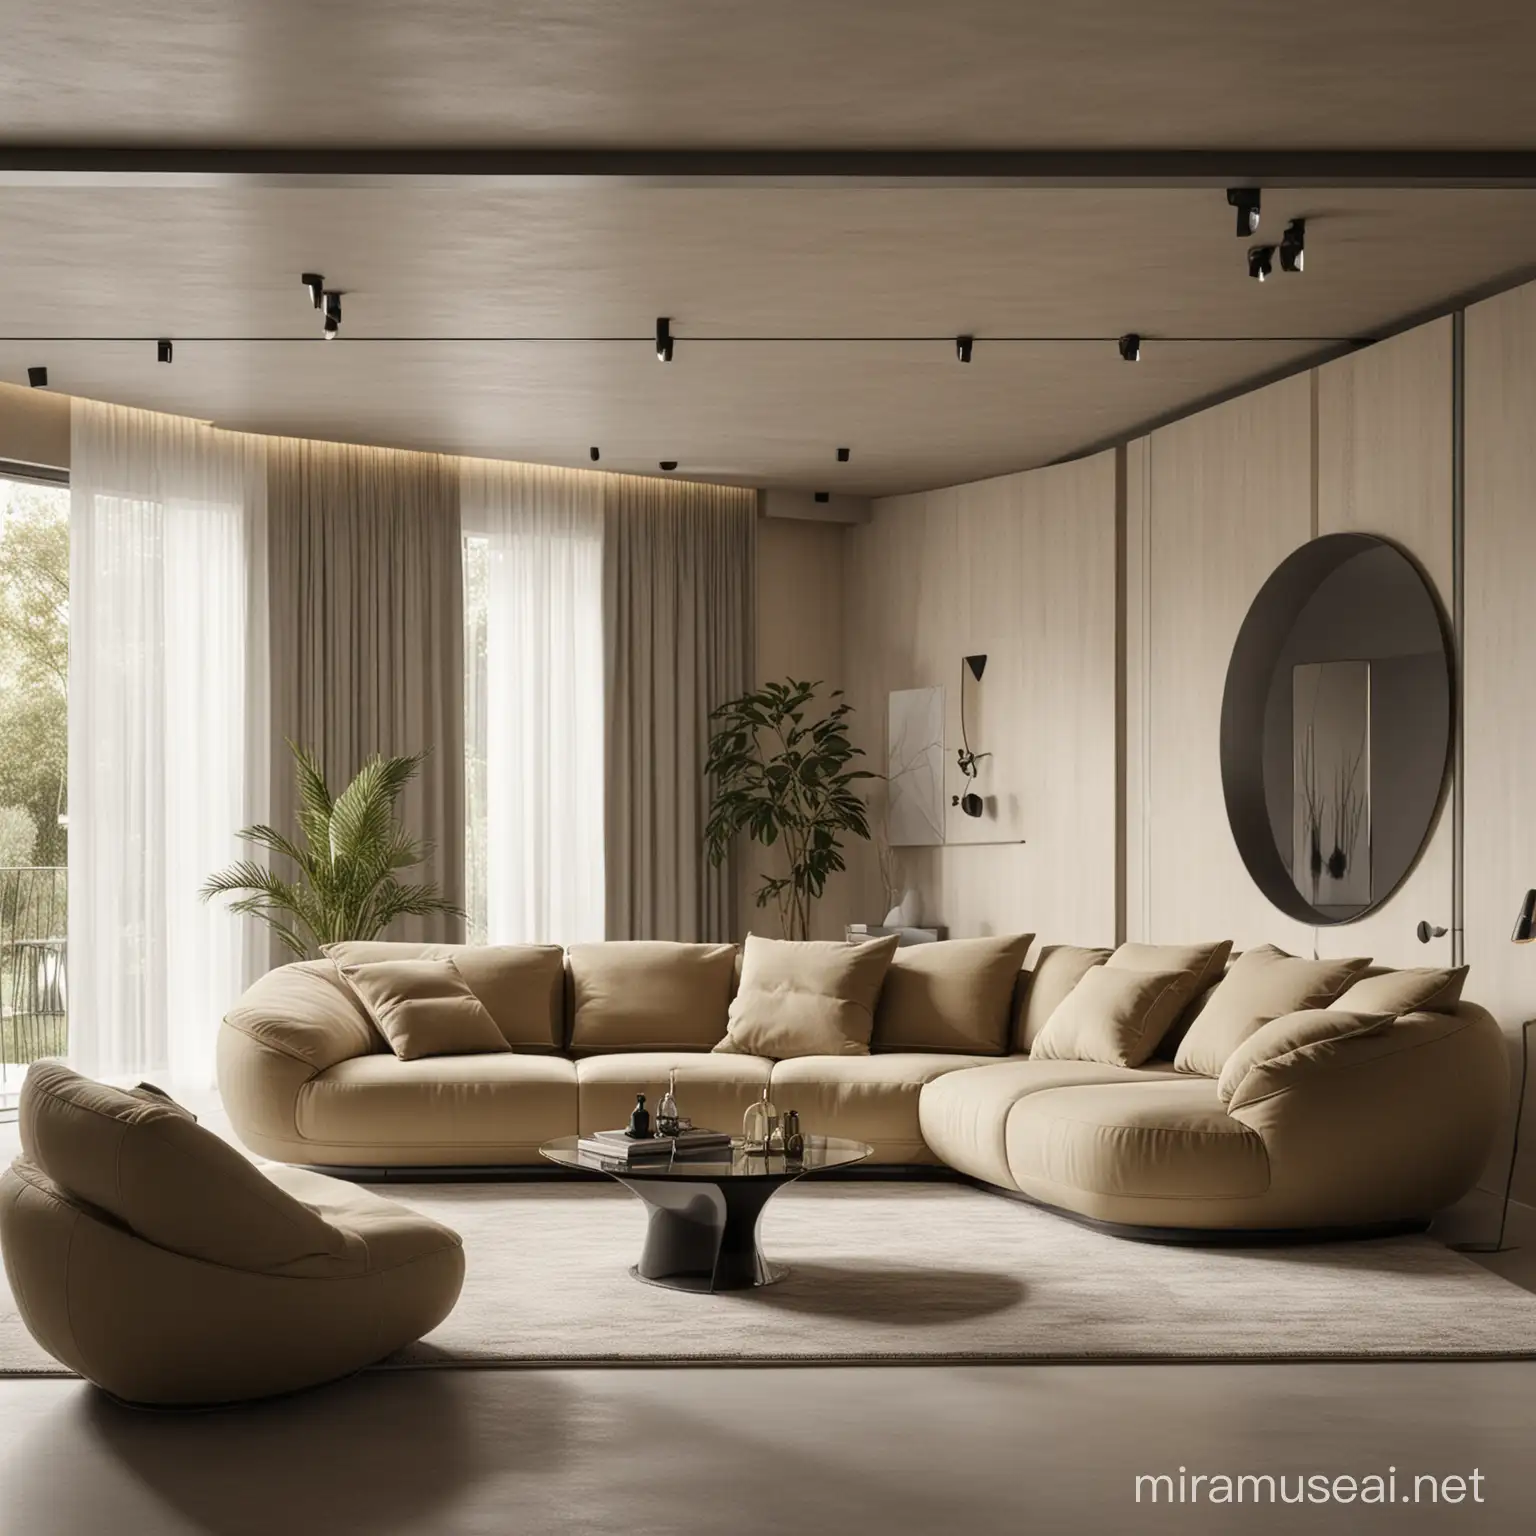 Futuristic 2095 Living Room with Antree and Elegant Sofa in Khaki Anthracite and Champagne Tones